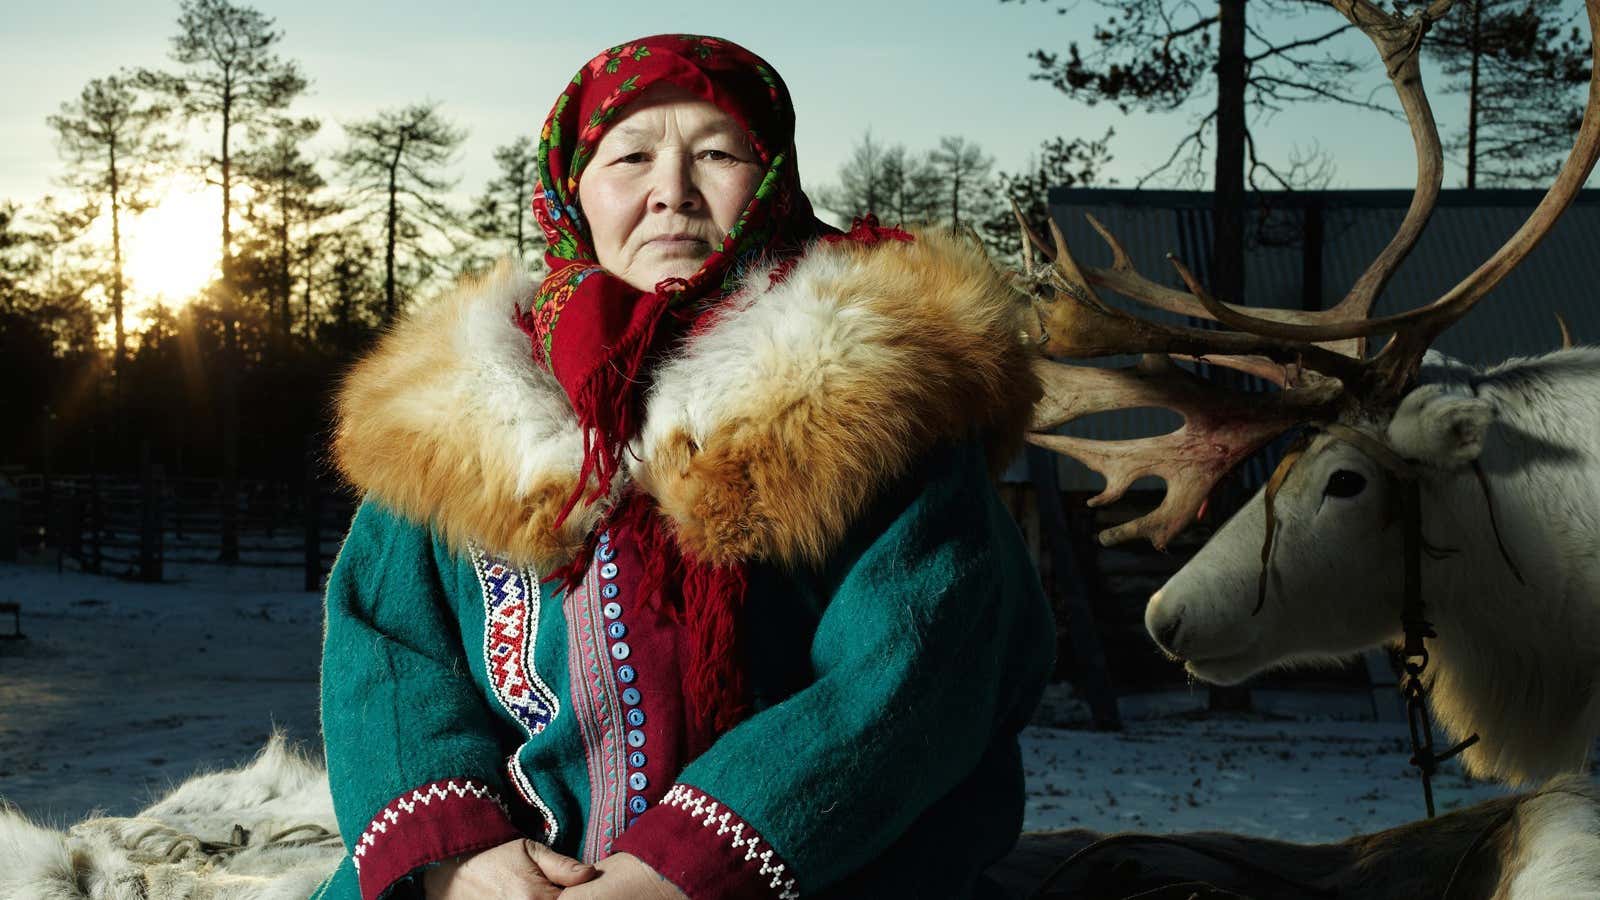 Photos: The gorgeous simplicity of life as a Siberian nomad